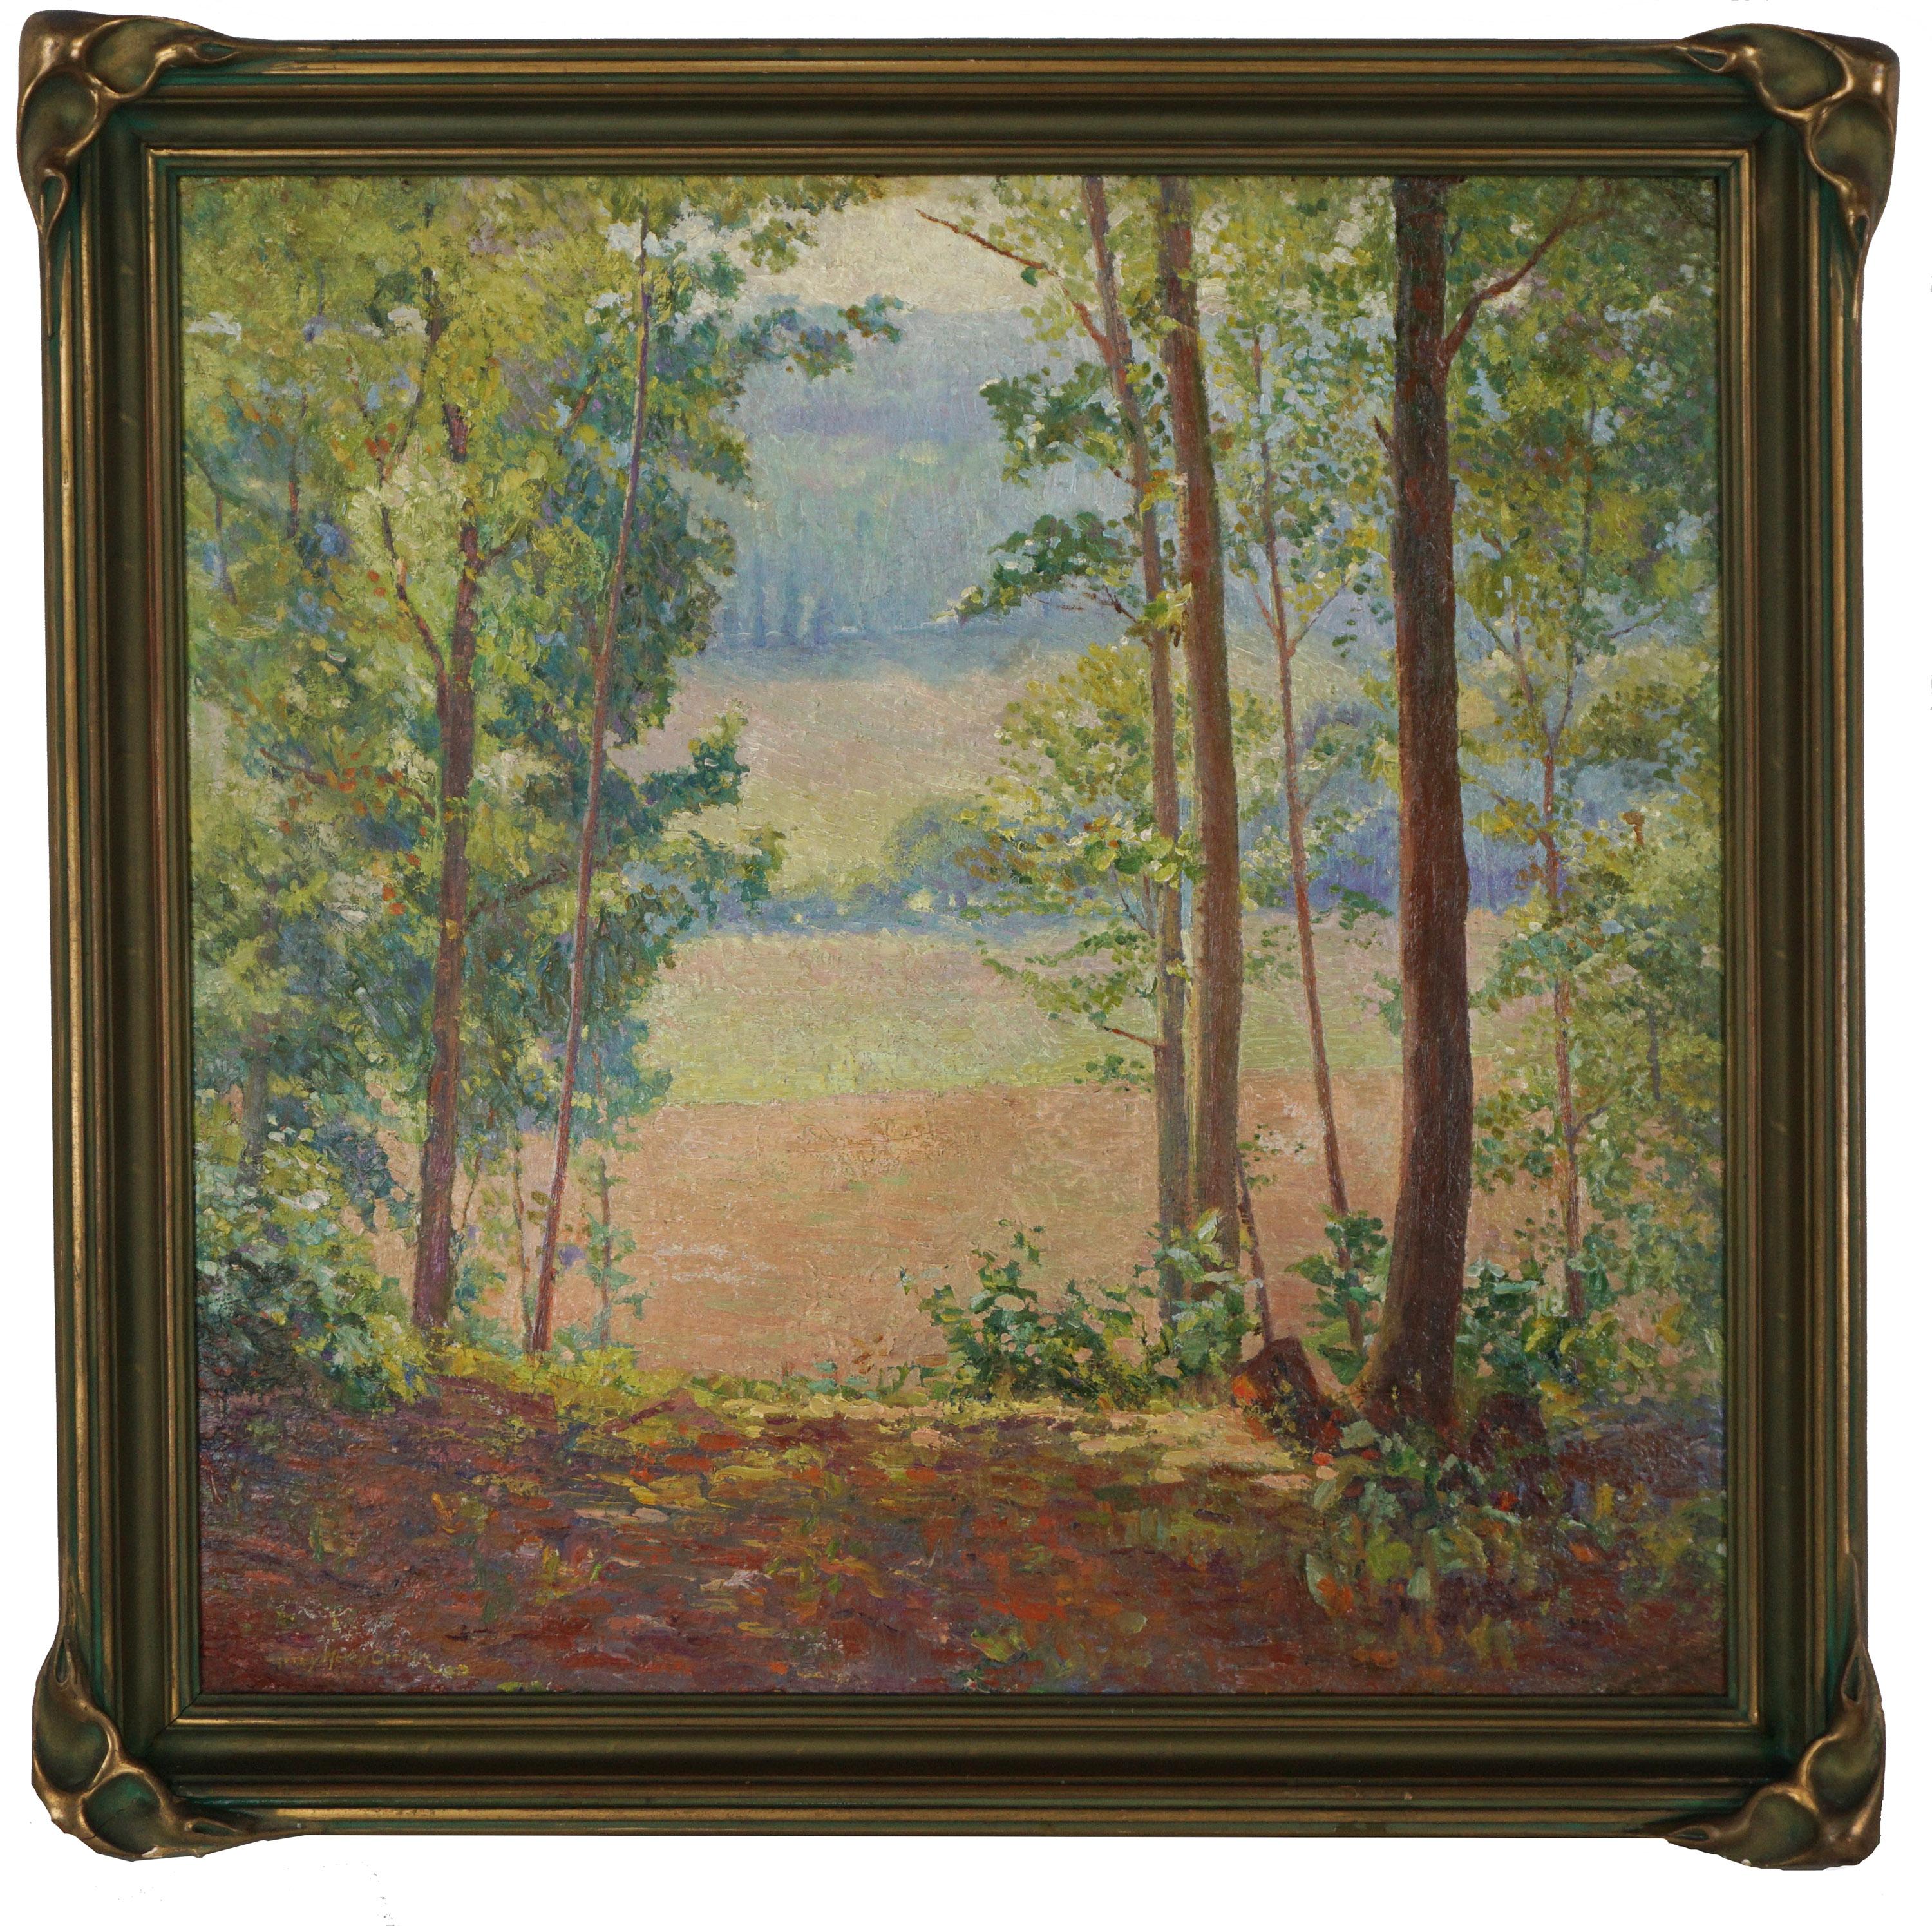 Dorothy McVey Cother Landscape Painting - Early 20th Century American Impressionist Late Summer New York Landscape